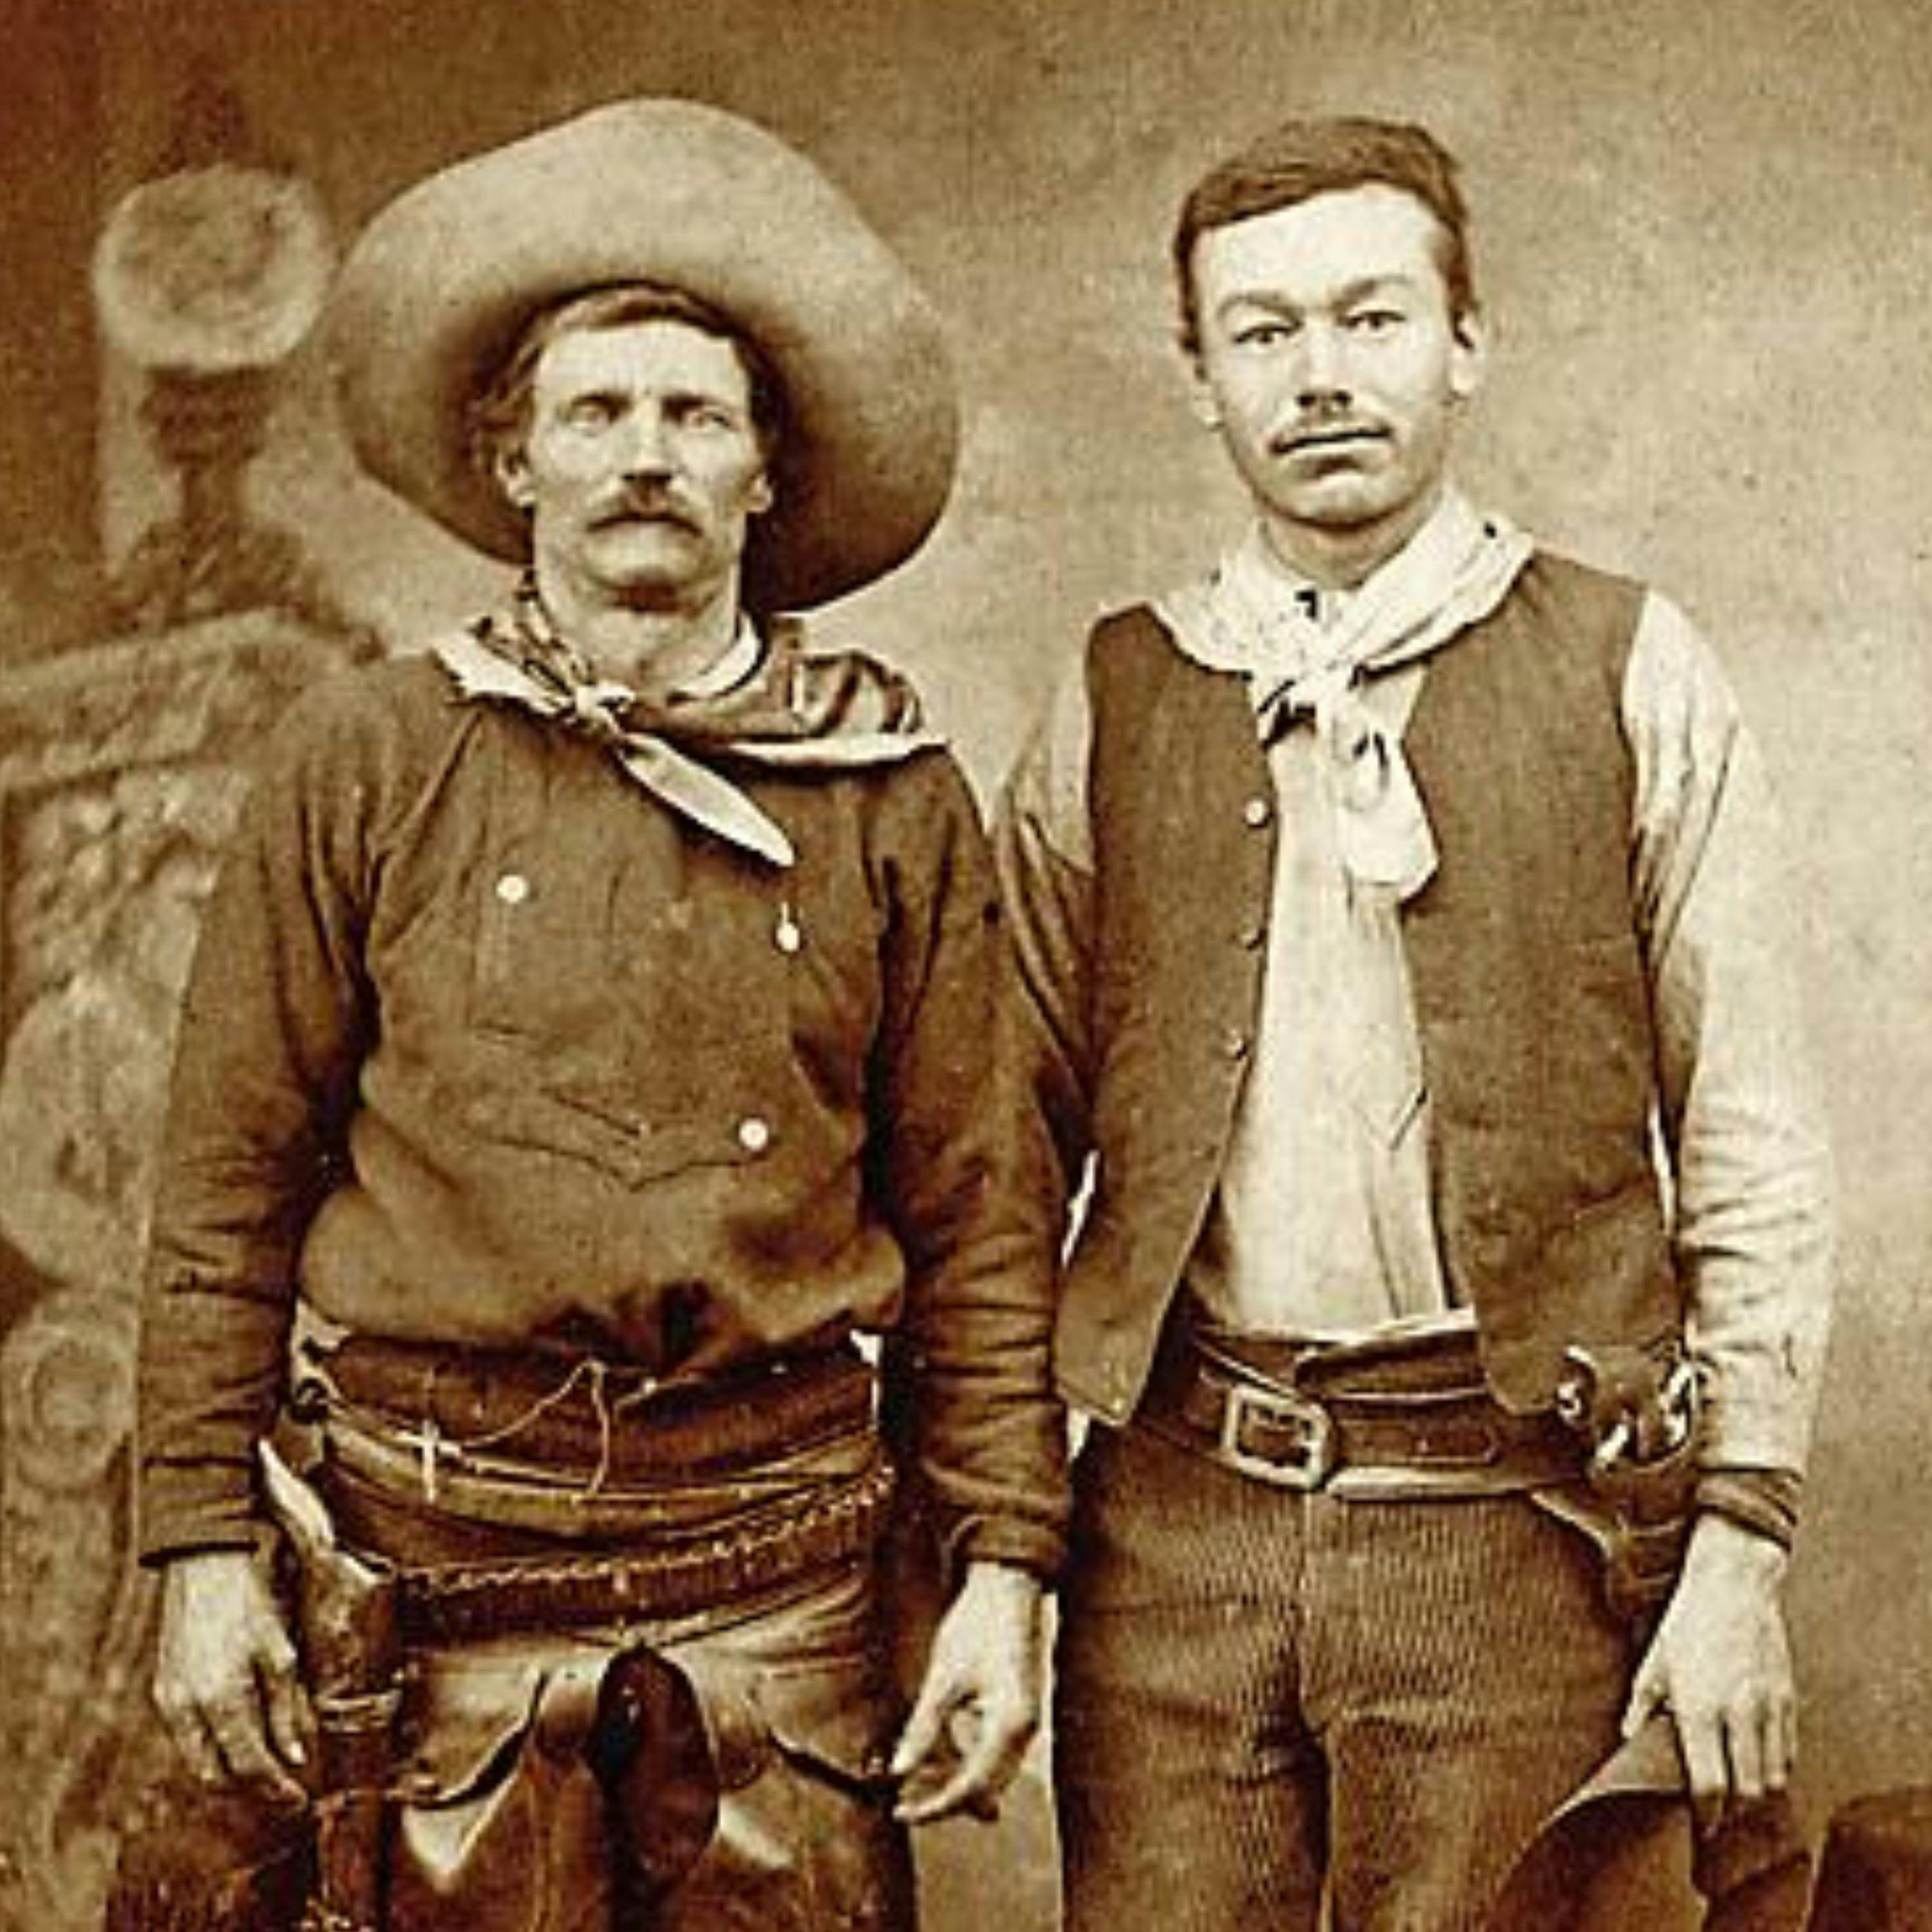 Legends of the Wild West | Outlaws, Gunfighters, & Lawmen